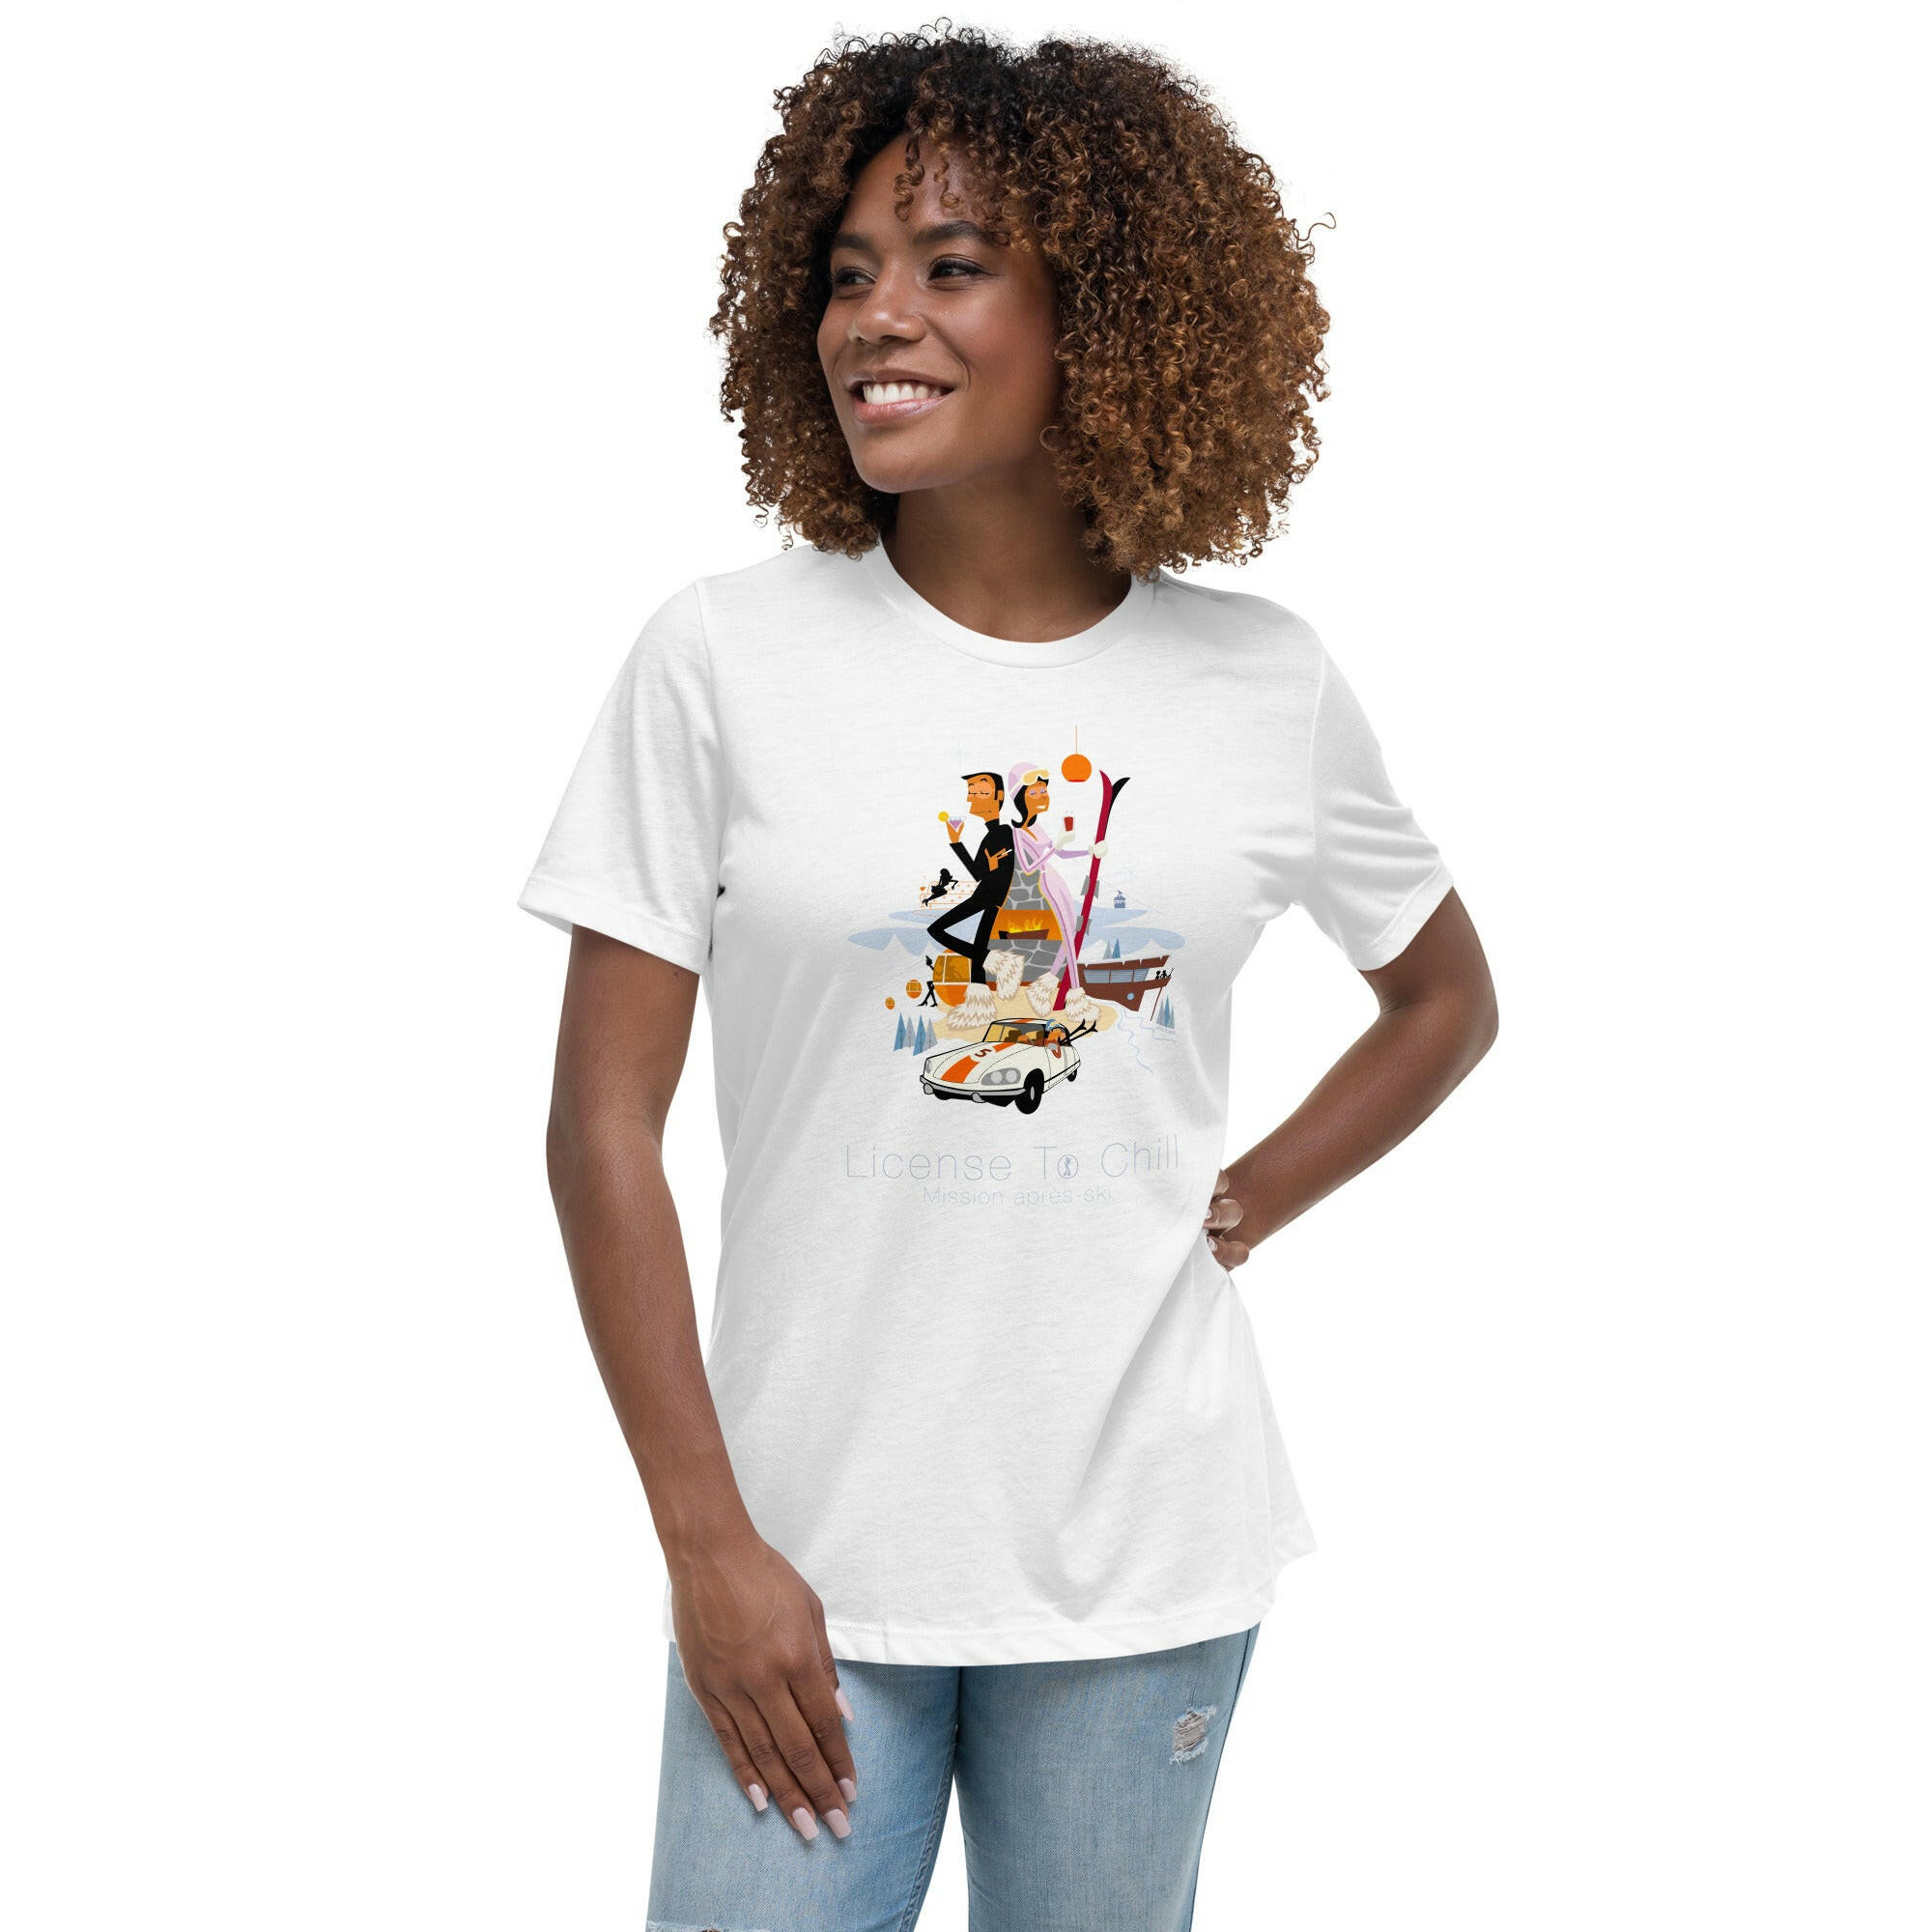 Women's Relaxed T-Shirt License To Chill Mission Après-Ski